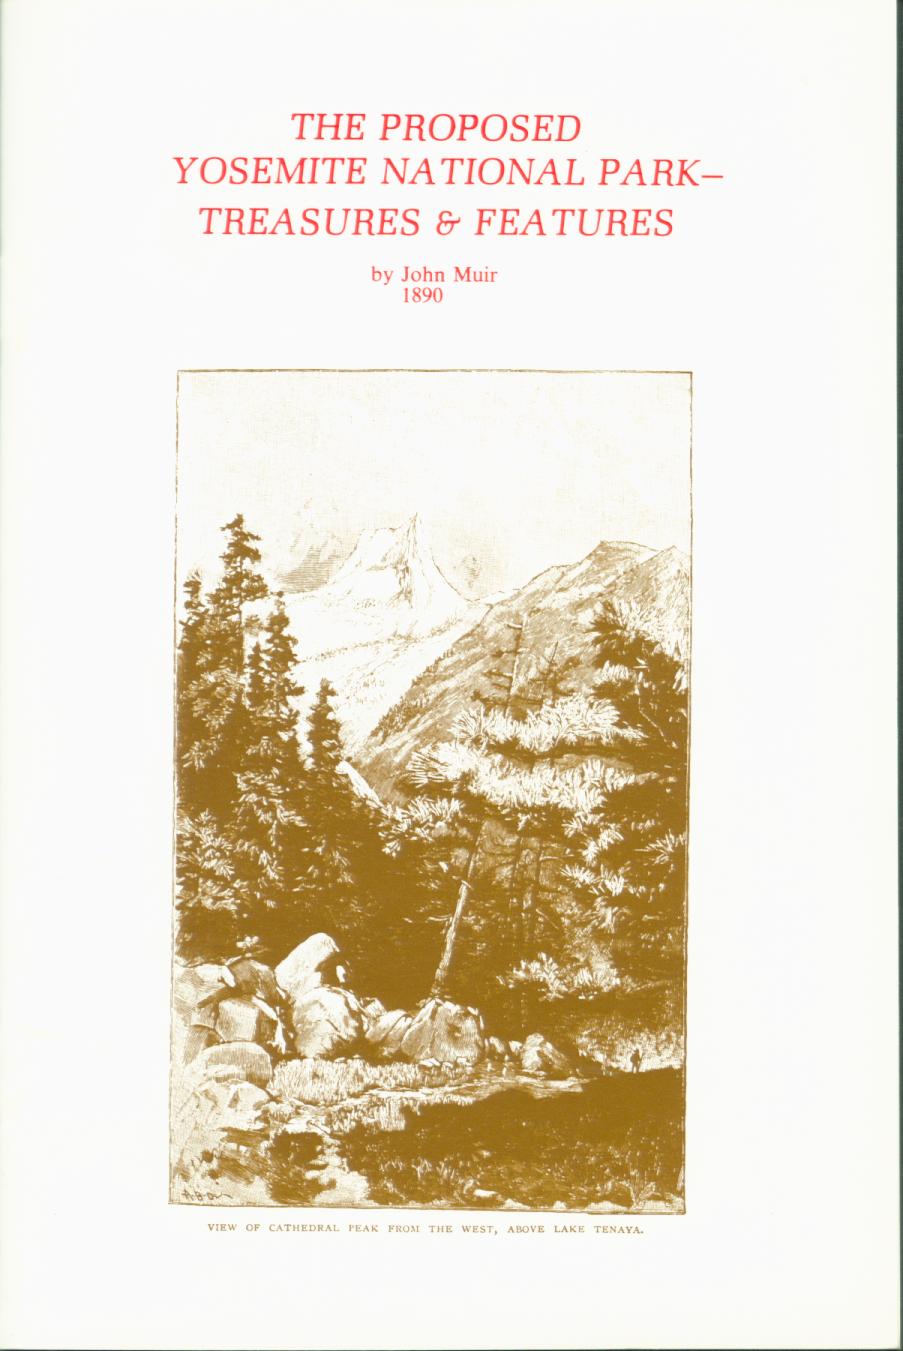 THE PROPOSED YOSEMITE NATIONAL PARK--treasures & features, 1890. 